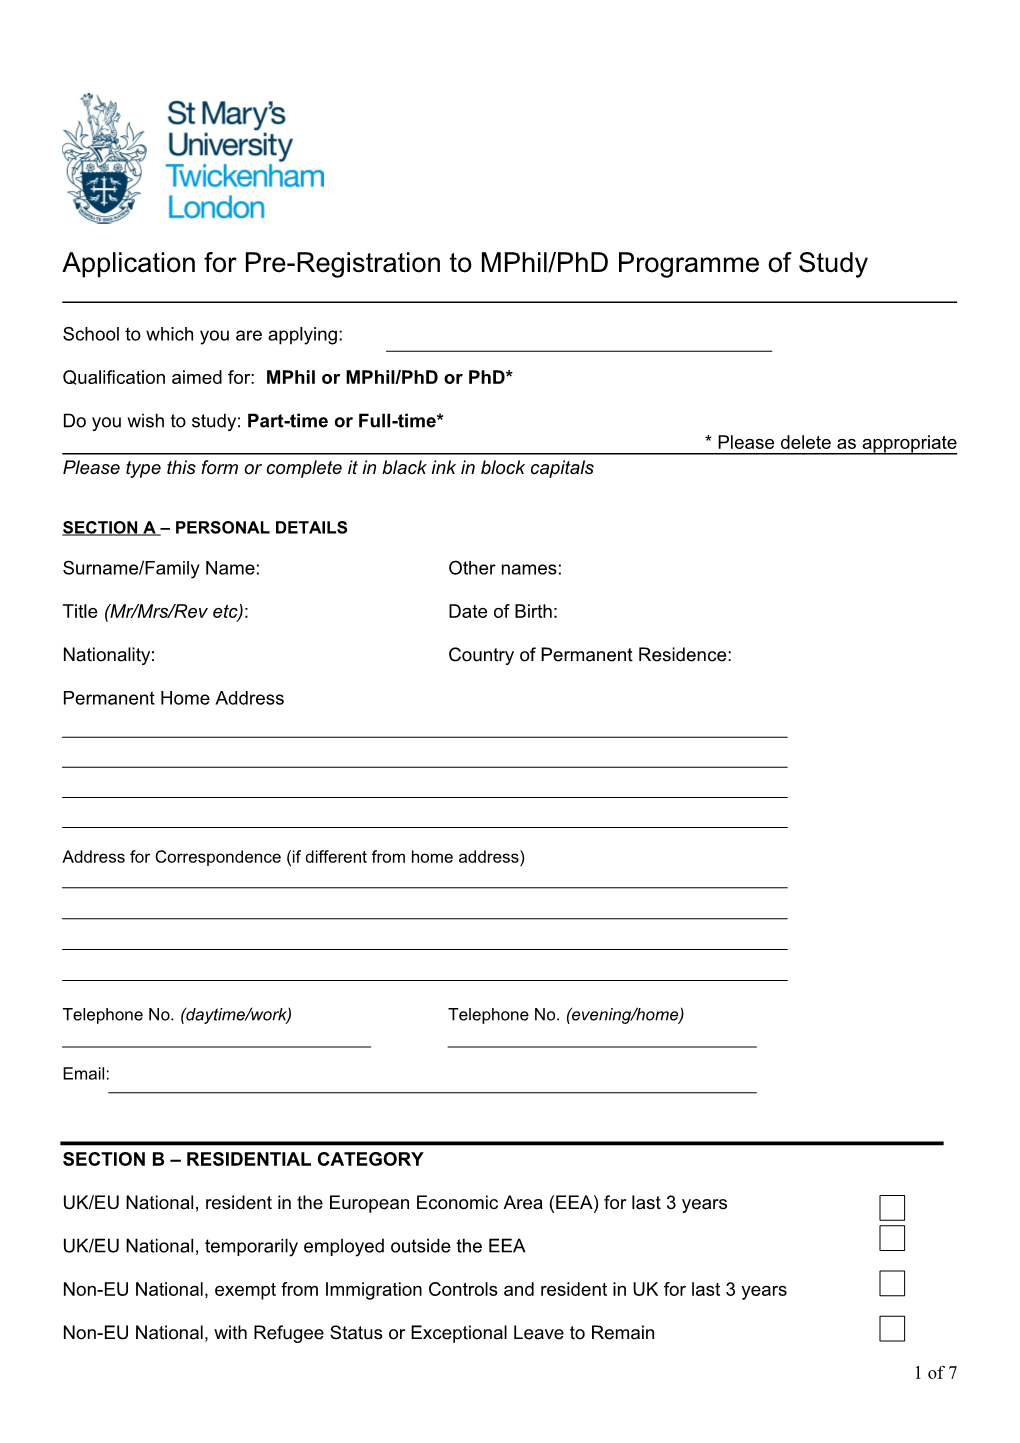 2015-Oct-Pre-Registration-Research-Application-Form